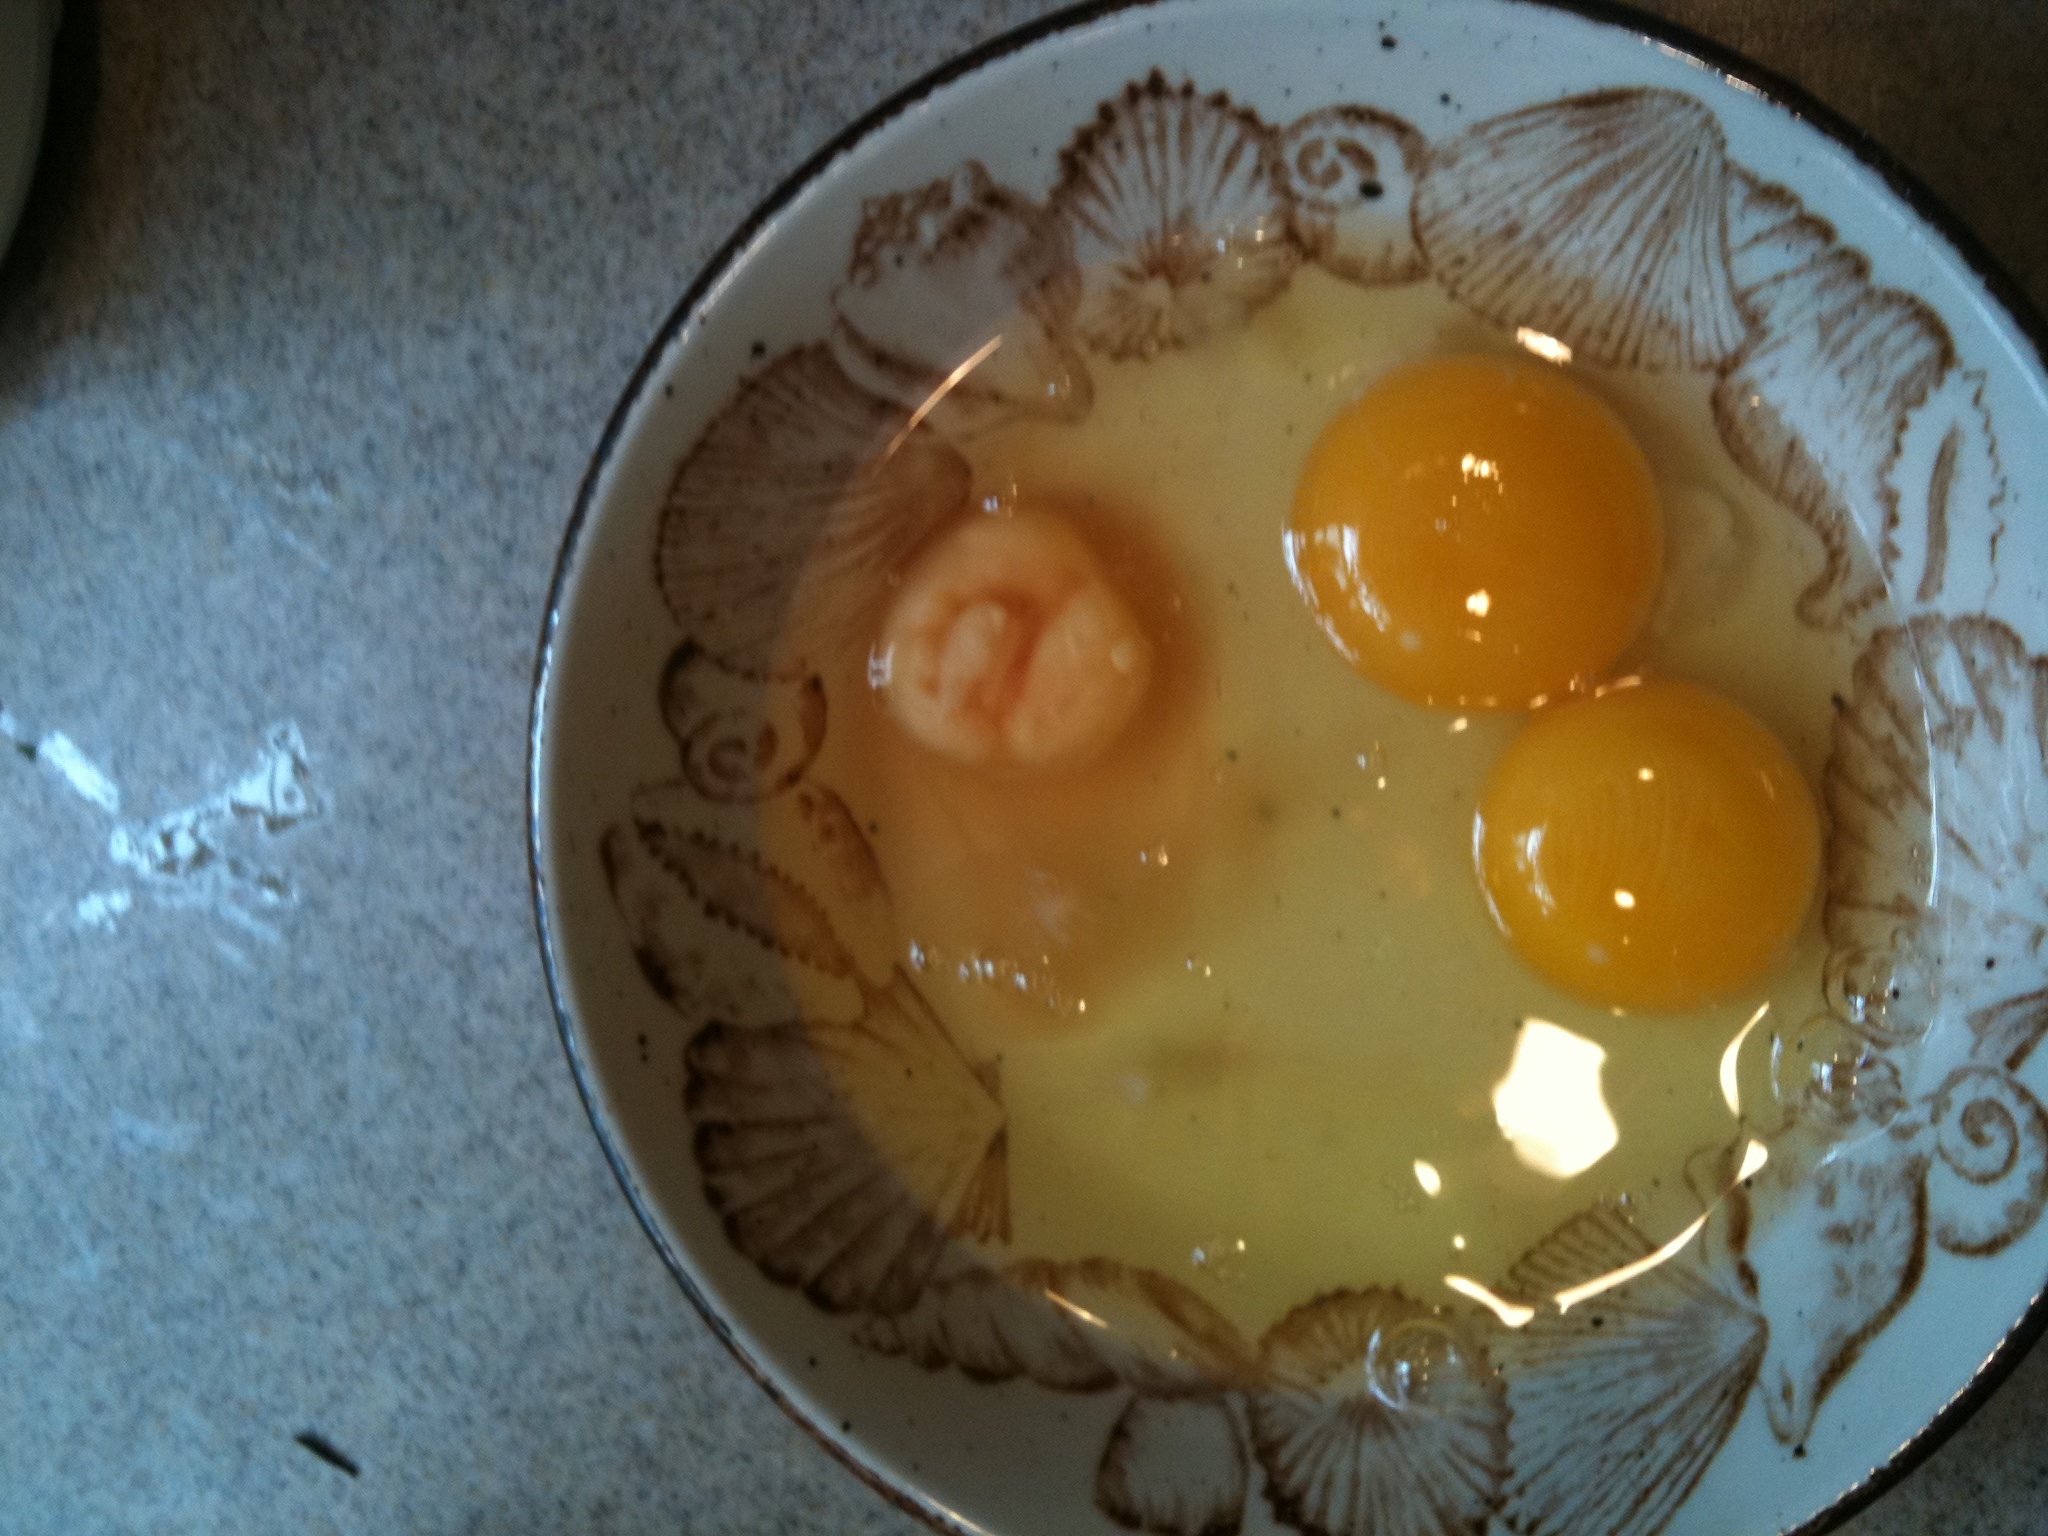 Ugg I was cracking eggs for breakfast one day and this is what came out!!